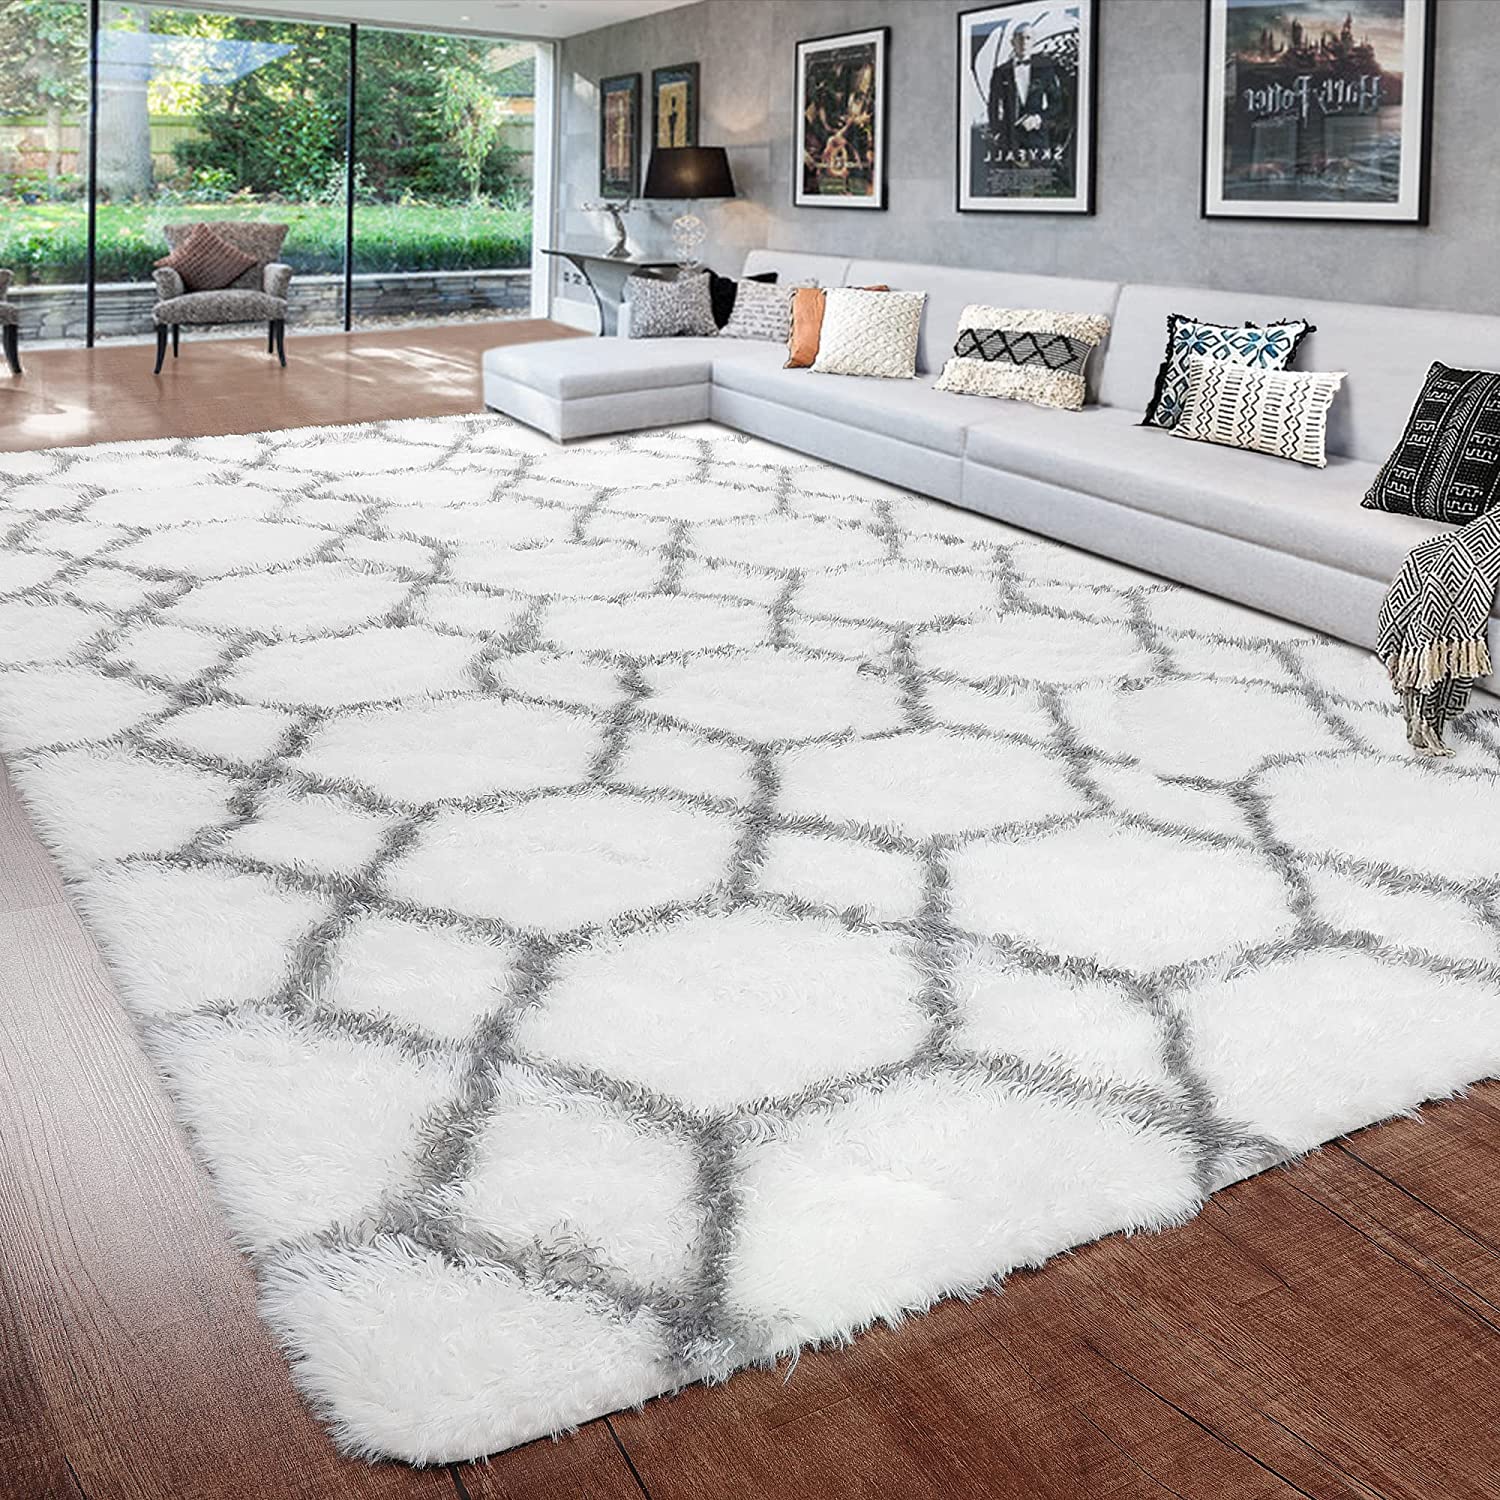  BSTLUV Soft Fuzzy Rugs for Living Room Bedroom,6x9 Ft